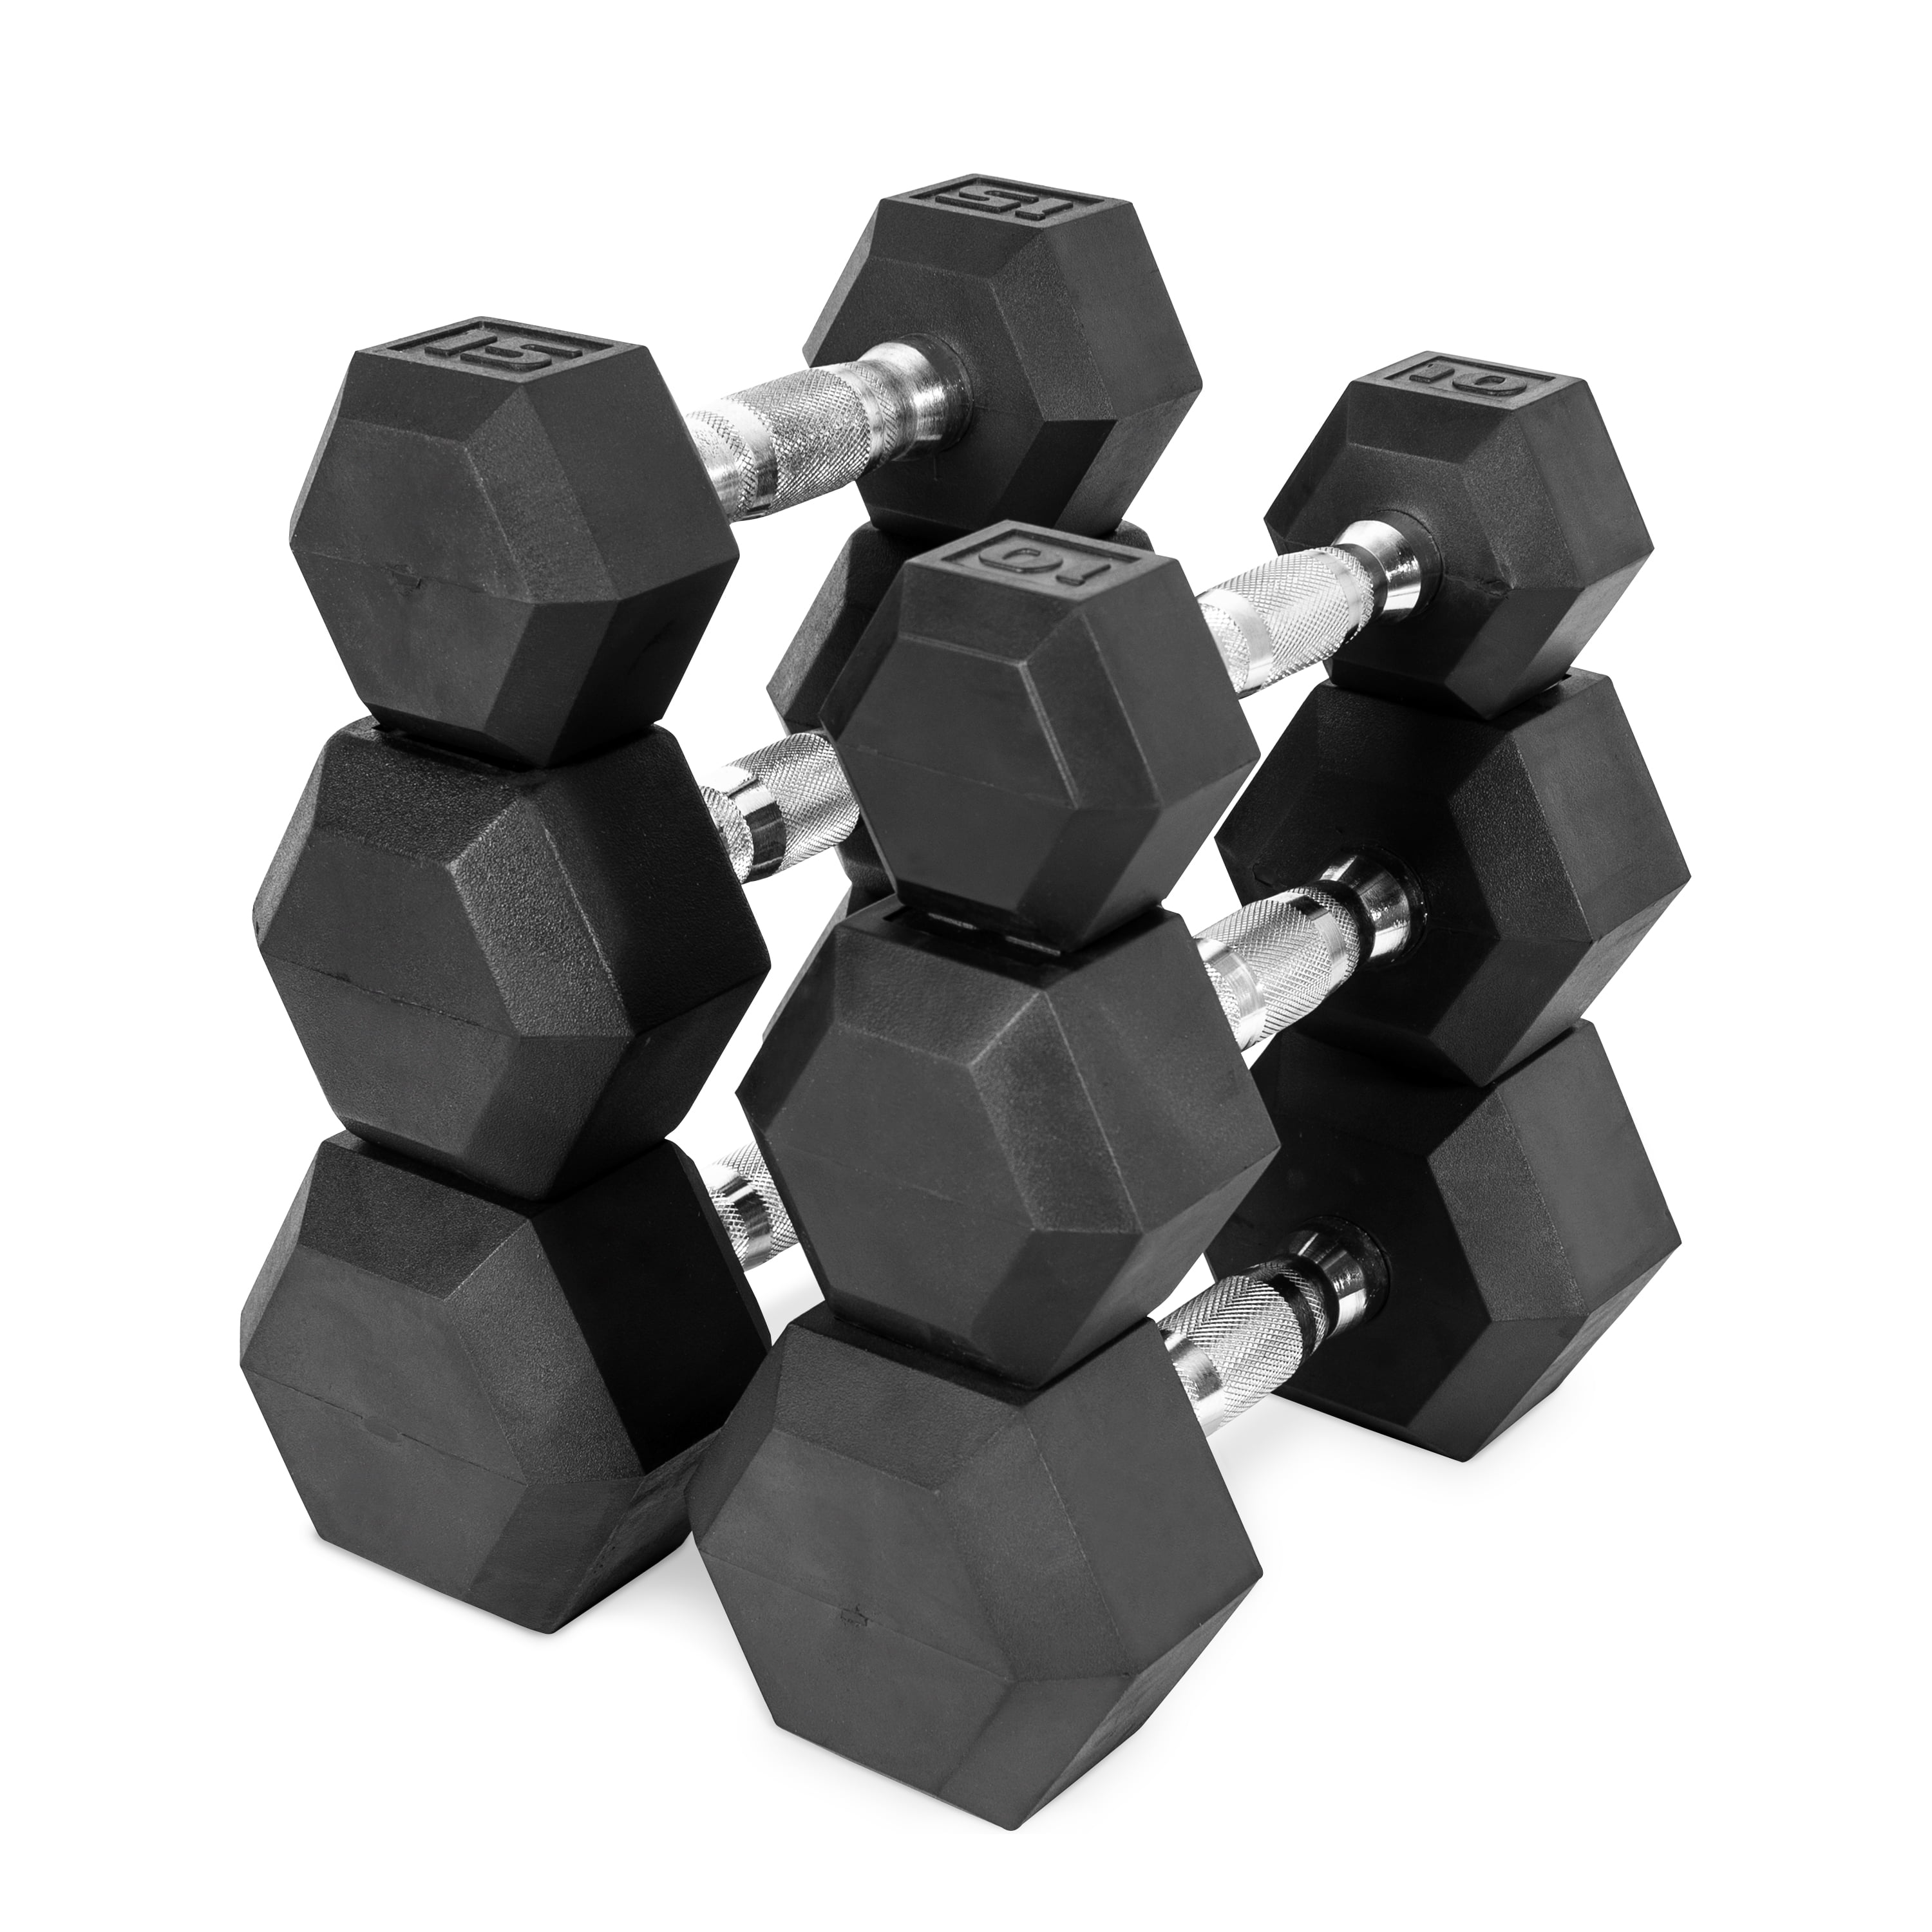 CAP 30 LB Single Dumbbell Rubber Coated Hex NEW IN HAND READY TO SHIP WEIGHT 